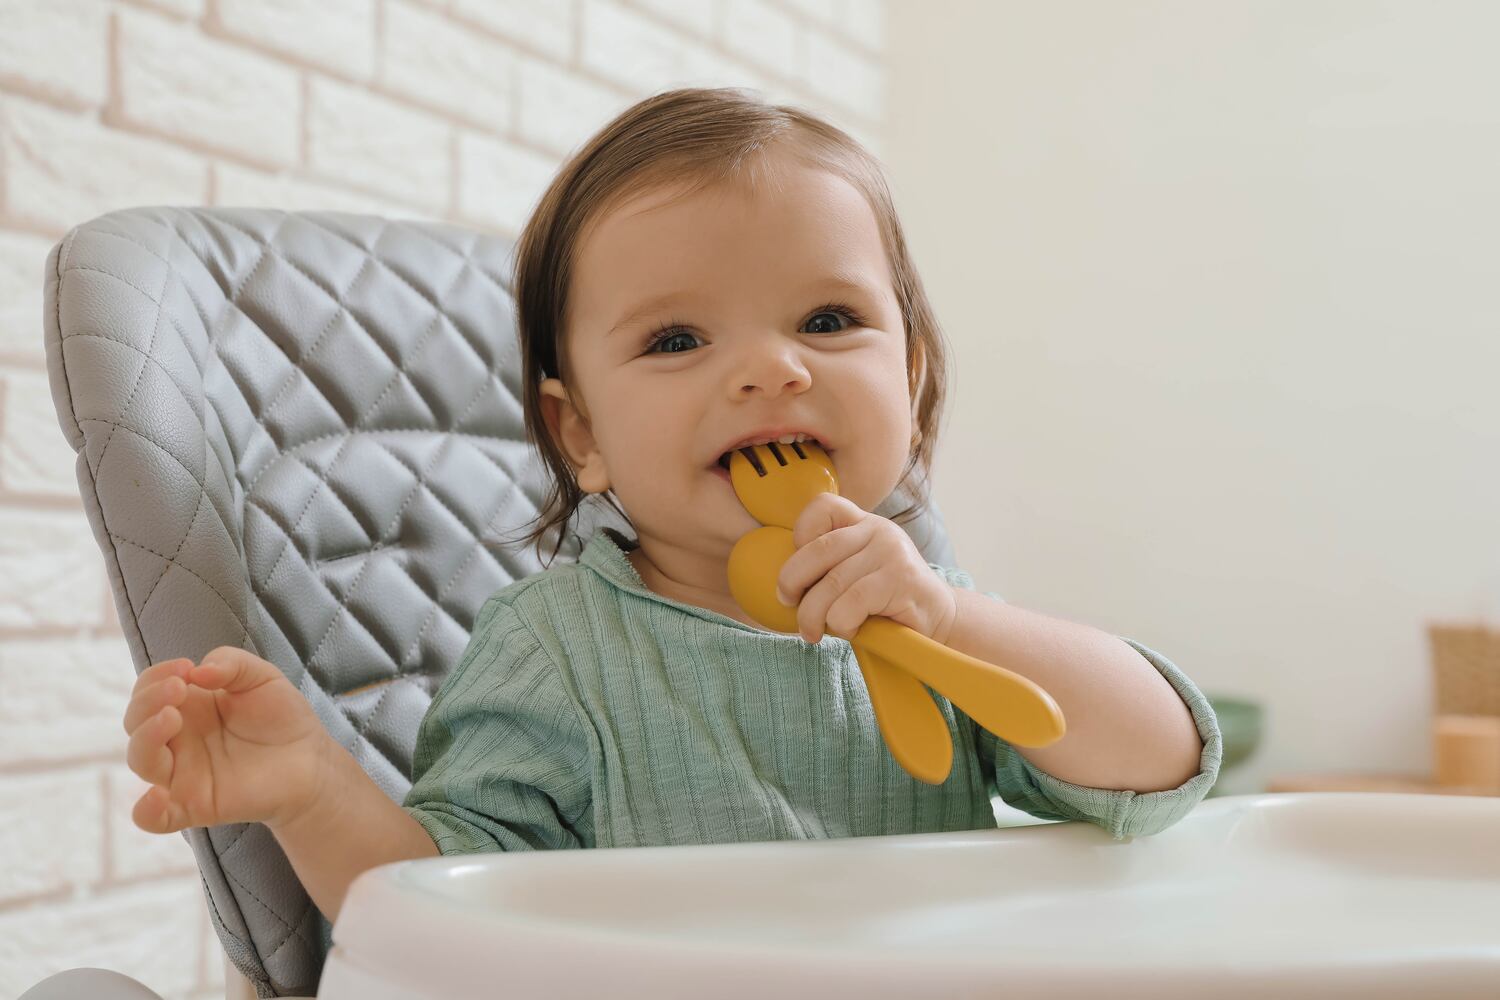 Teach your toddler how to use cutlery